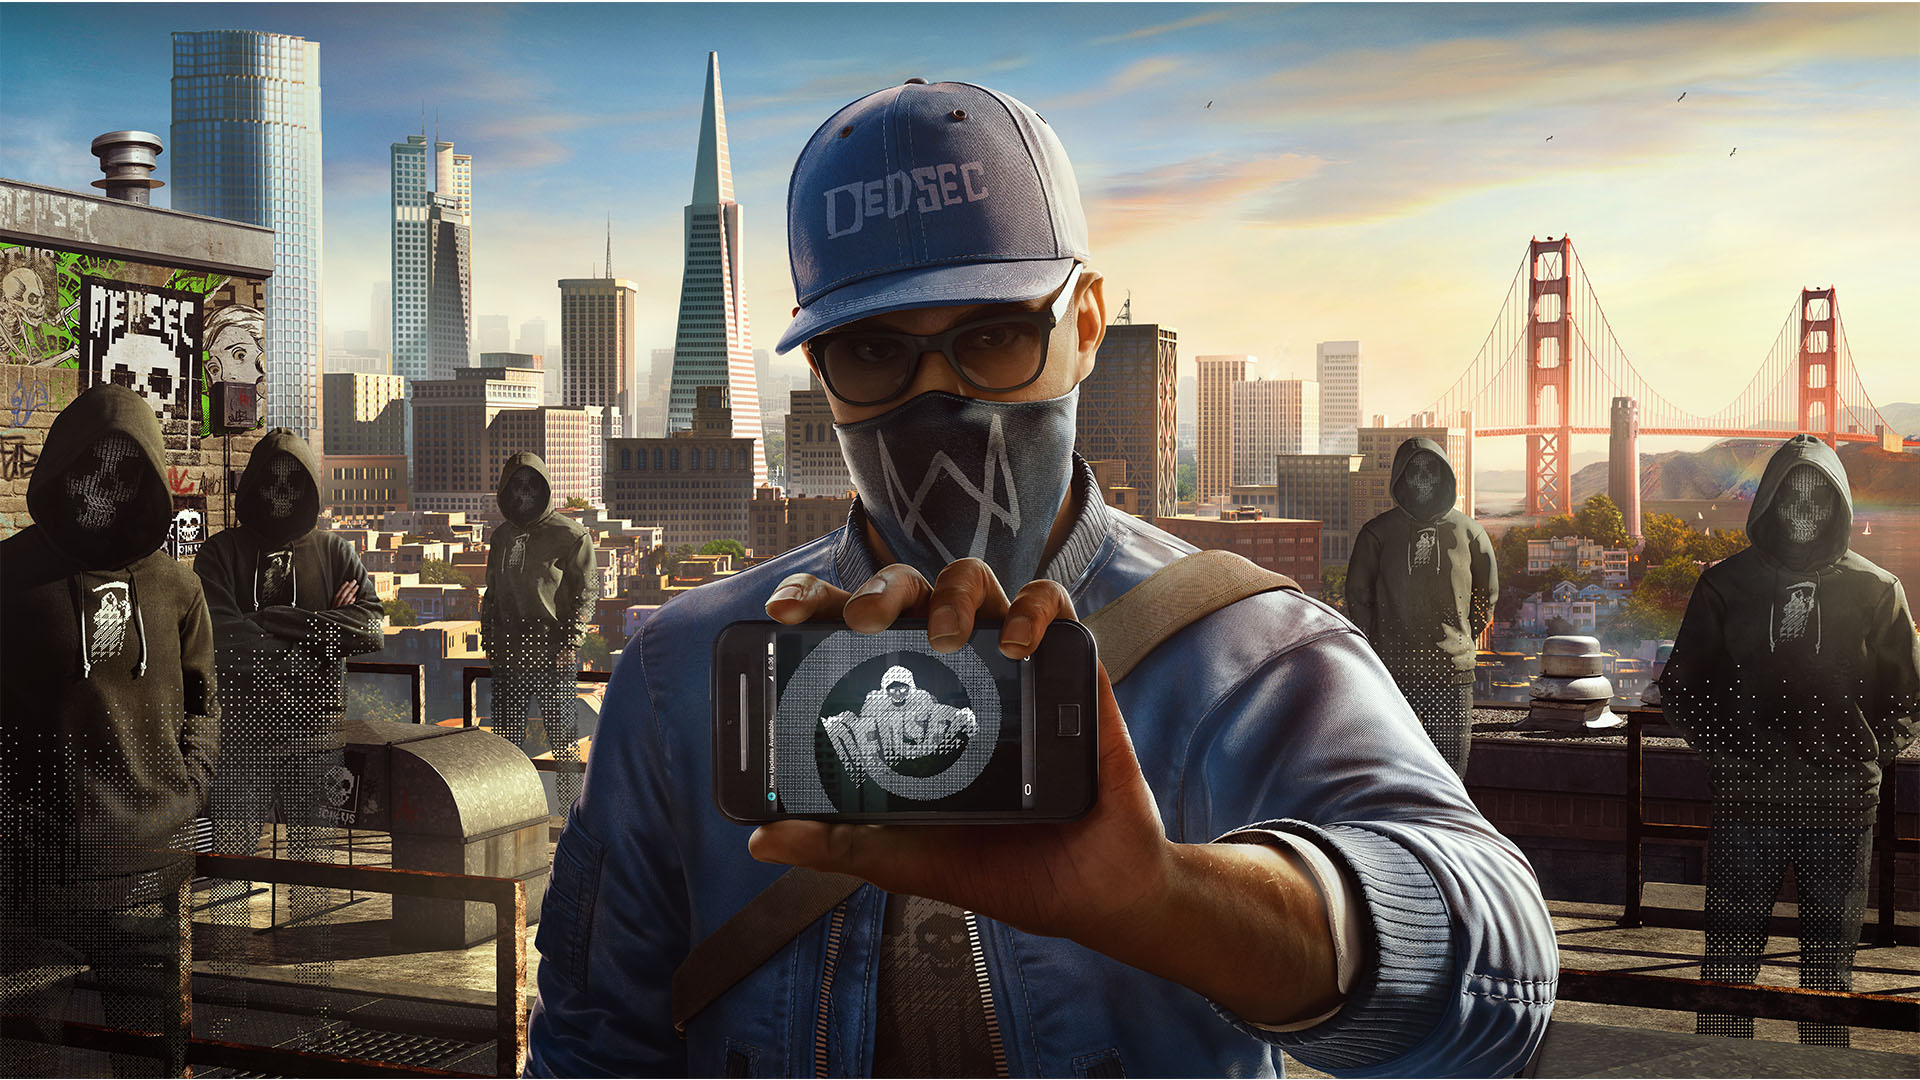 watch dogs 2 ps4 game